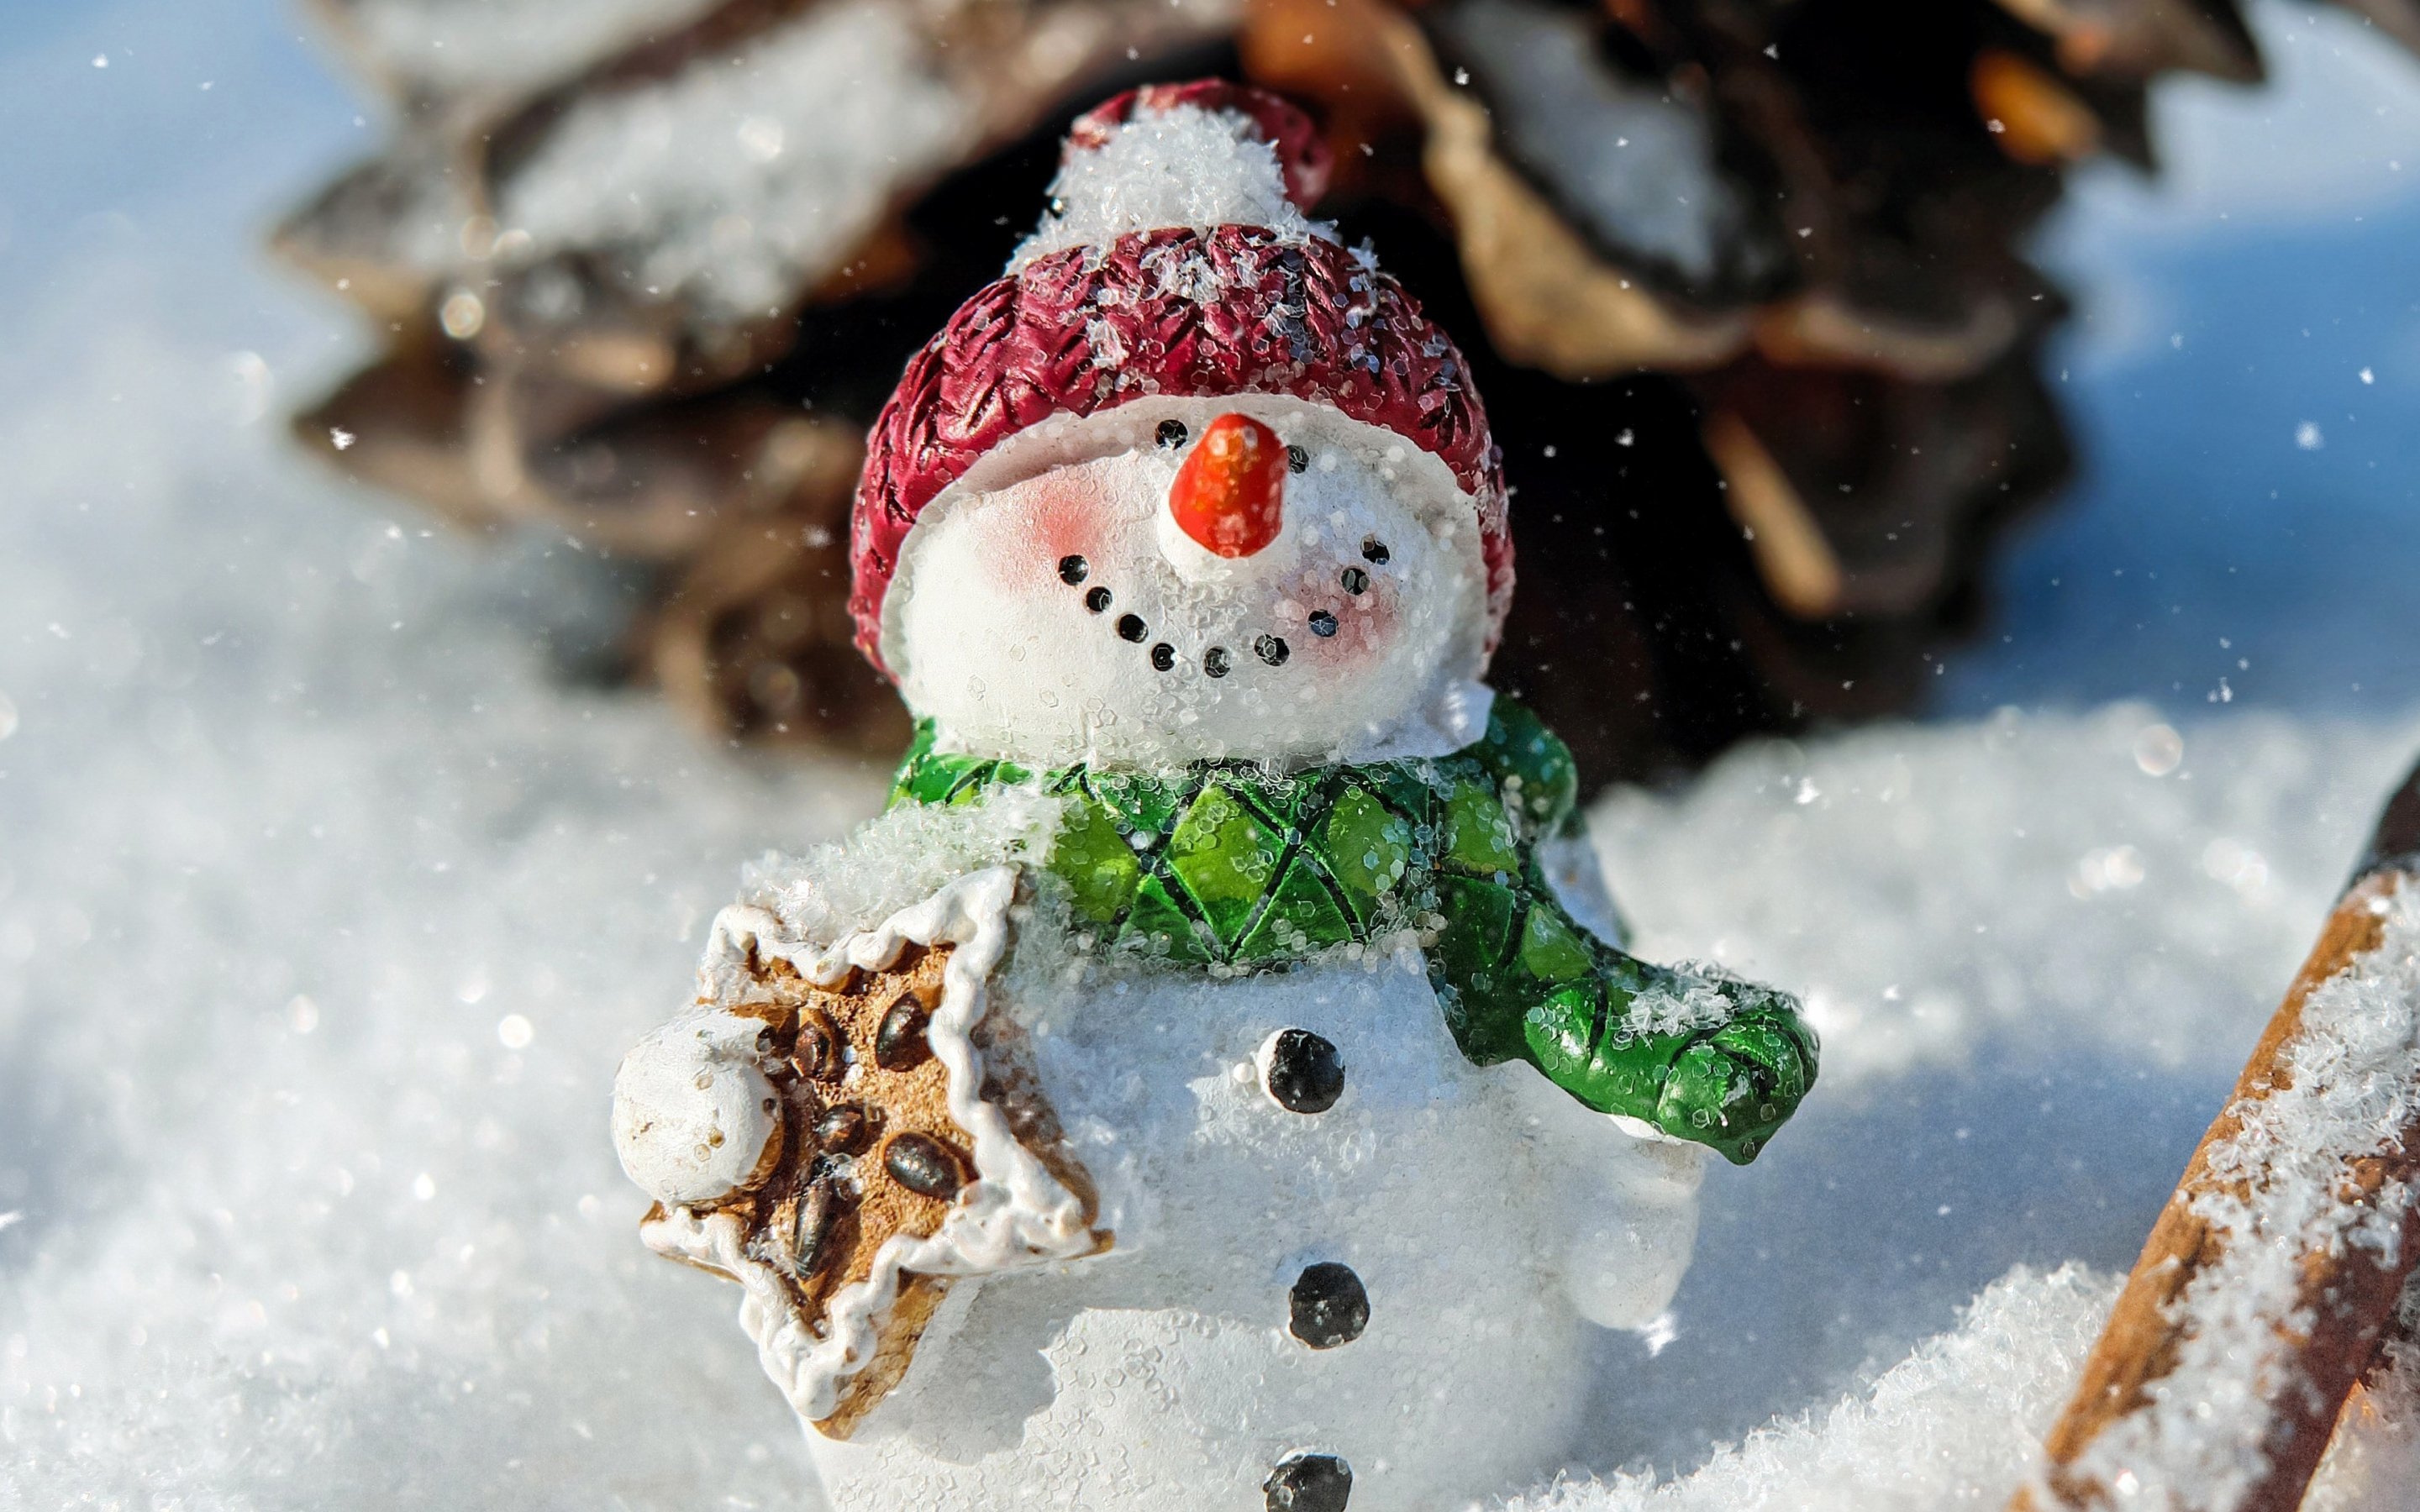 Download 2880x1800 wallpaper winter, snowman, funny, holiday, christmas, mac pro retaia image, background, 16048